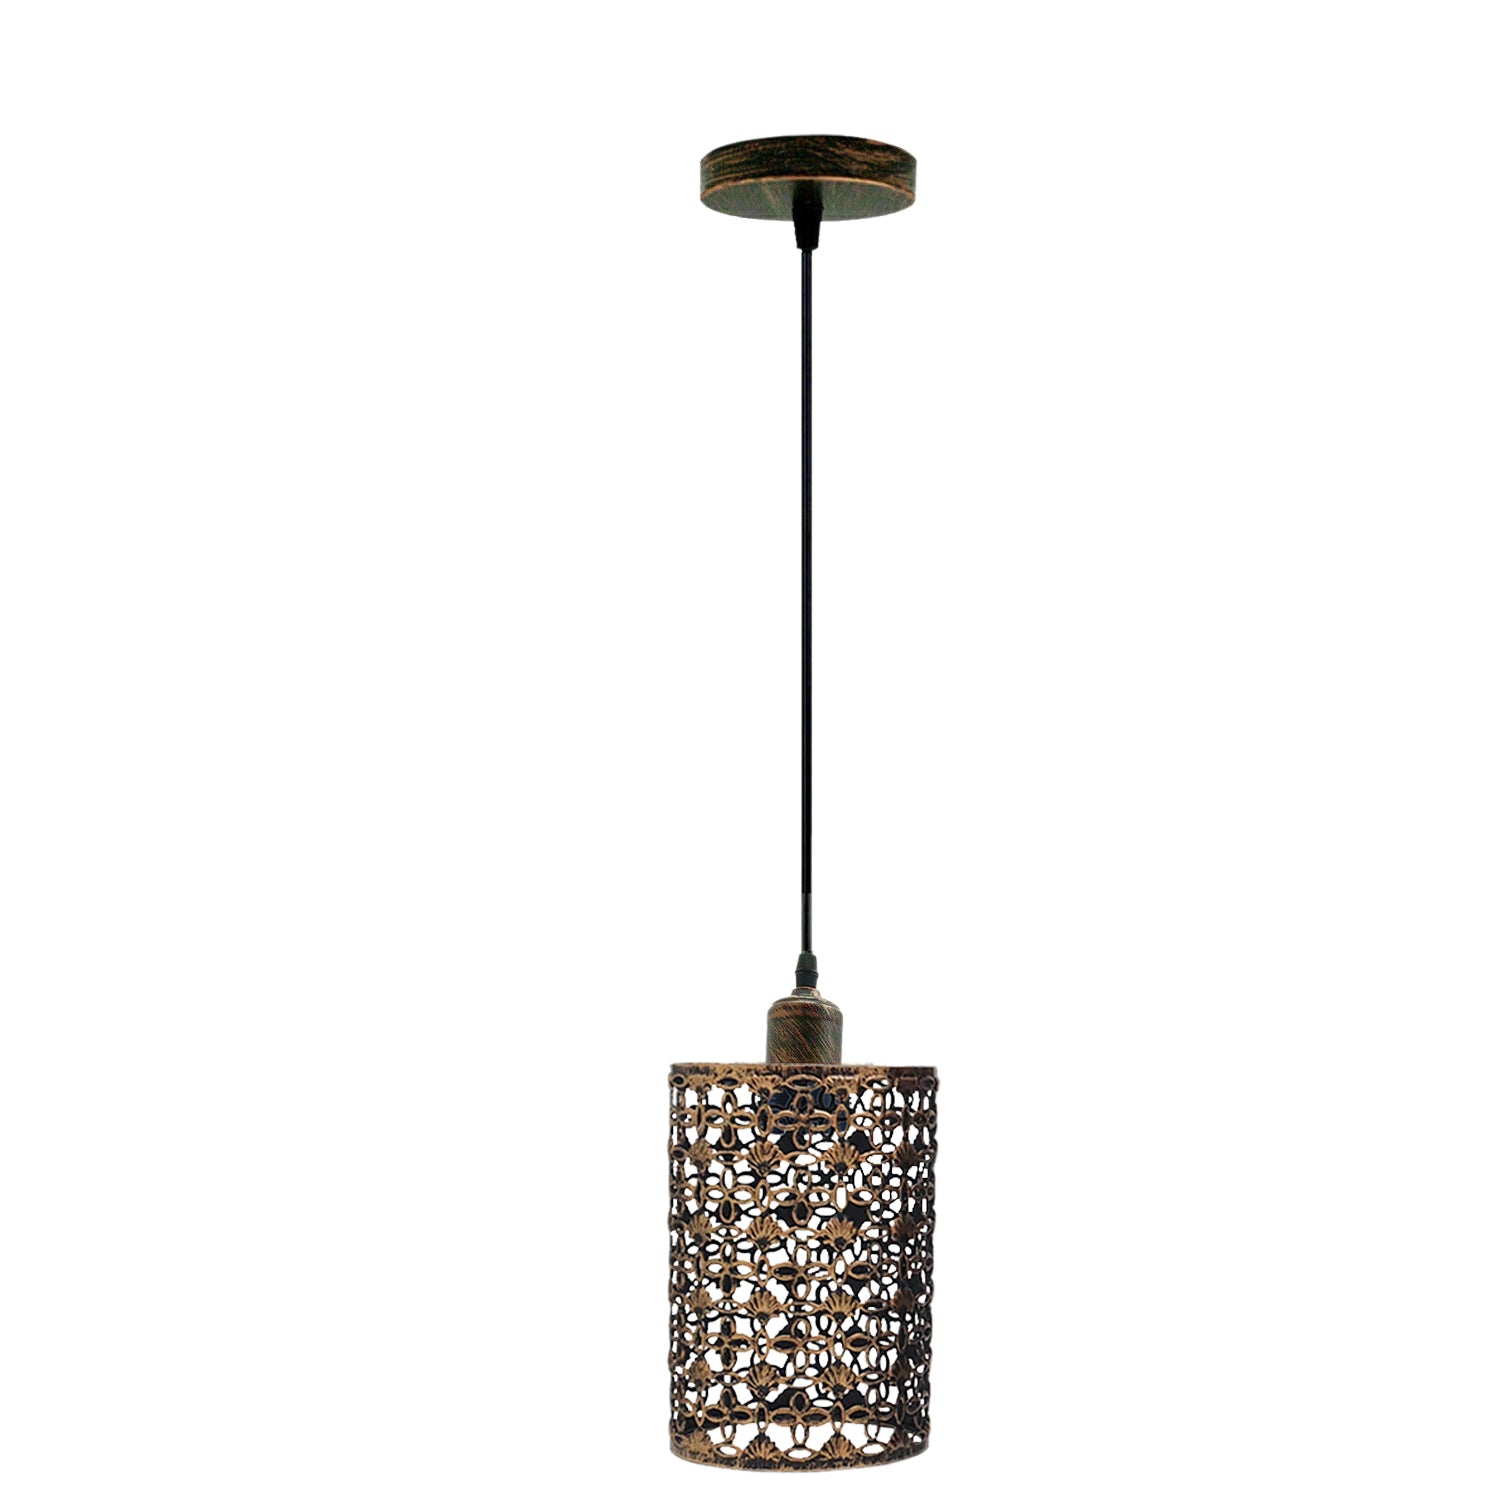 Modern cylinder cage ceiling pendant Lamp Shades